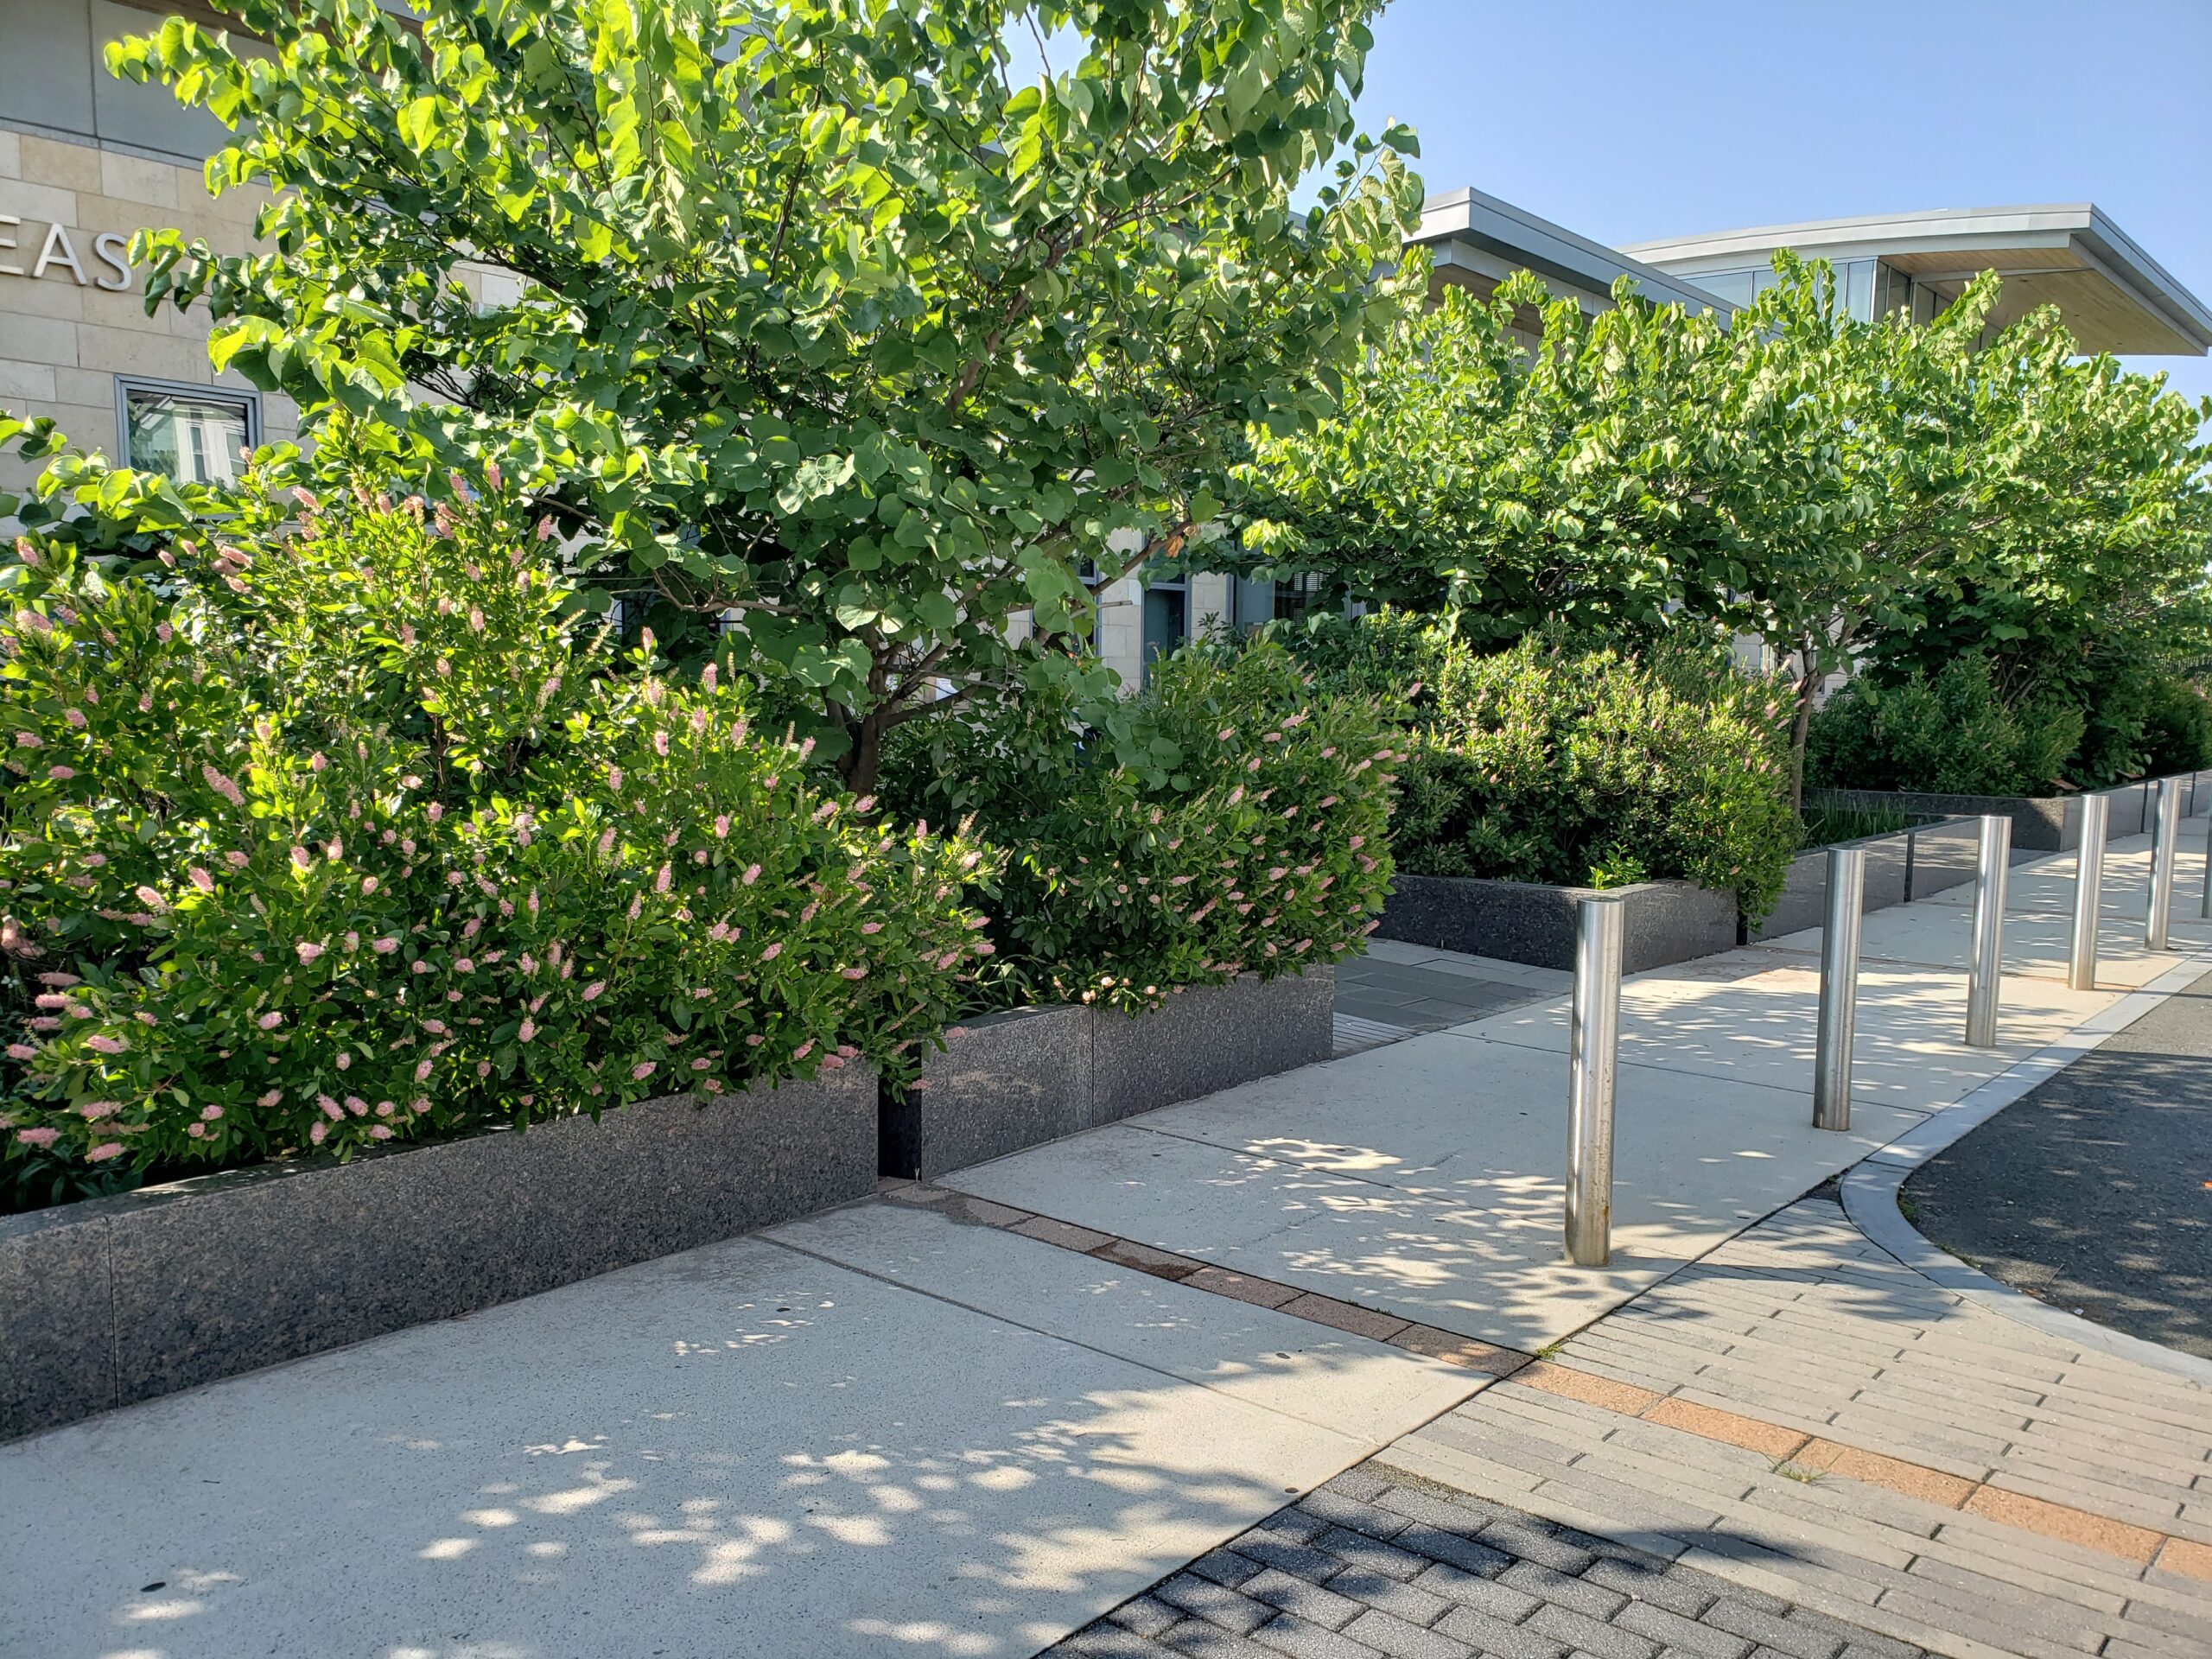 Featured image for “Boston Appoints NGICP Certificant as First Director of Green Infrastructure”